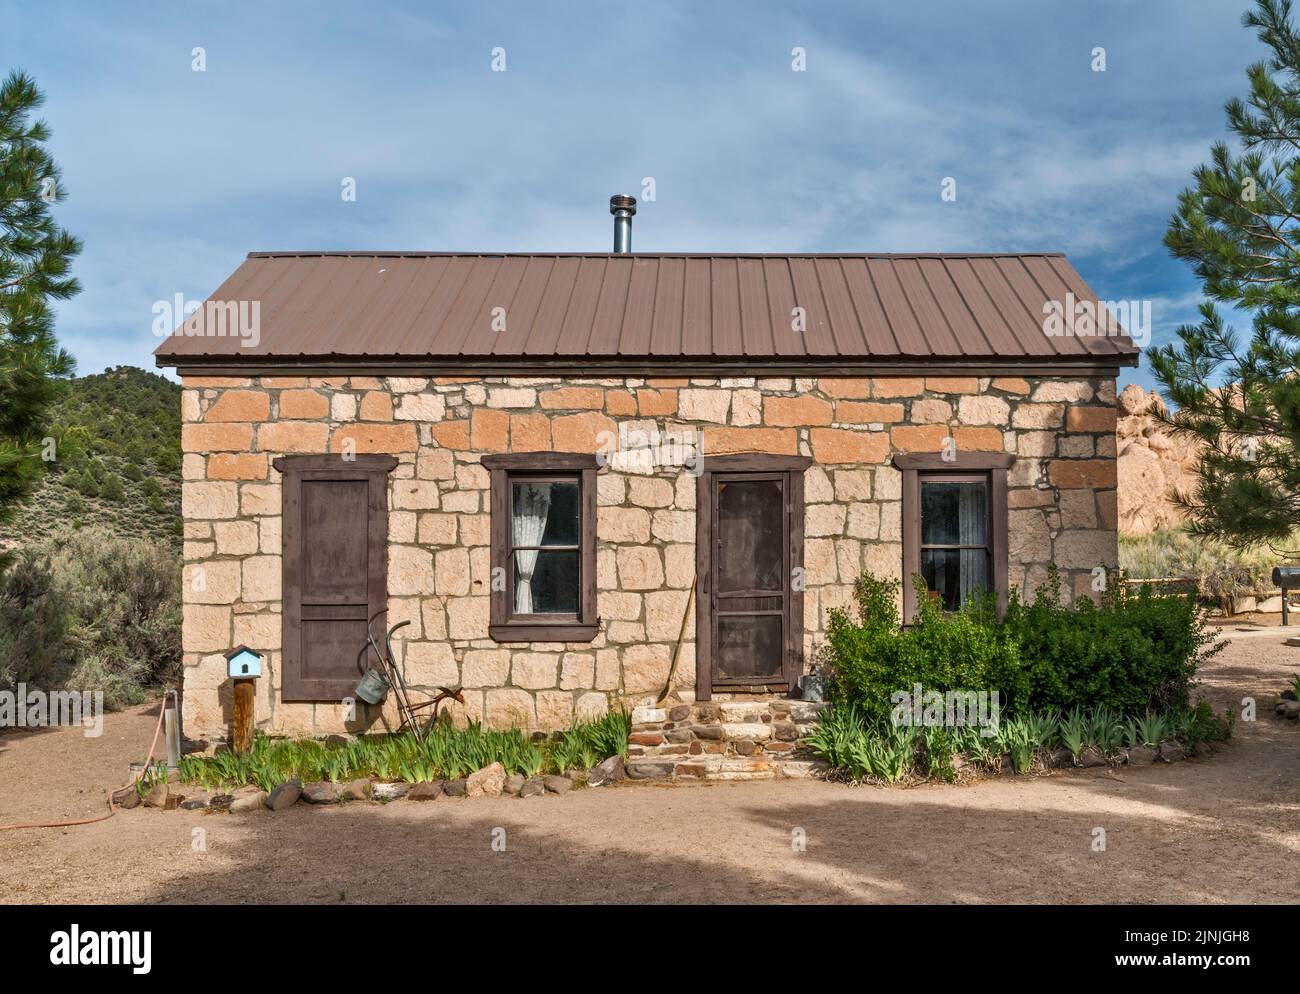 George Moody Cabin, 1870's, pioneer house at Spring Valley, near Ursine, Nevada, USA Stock Photo